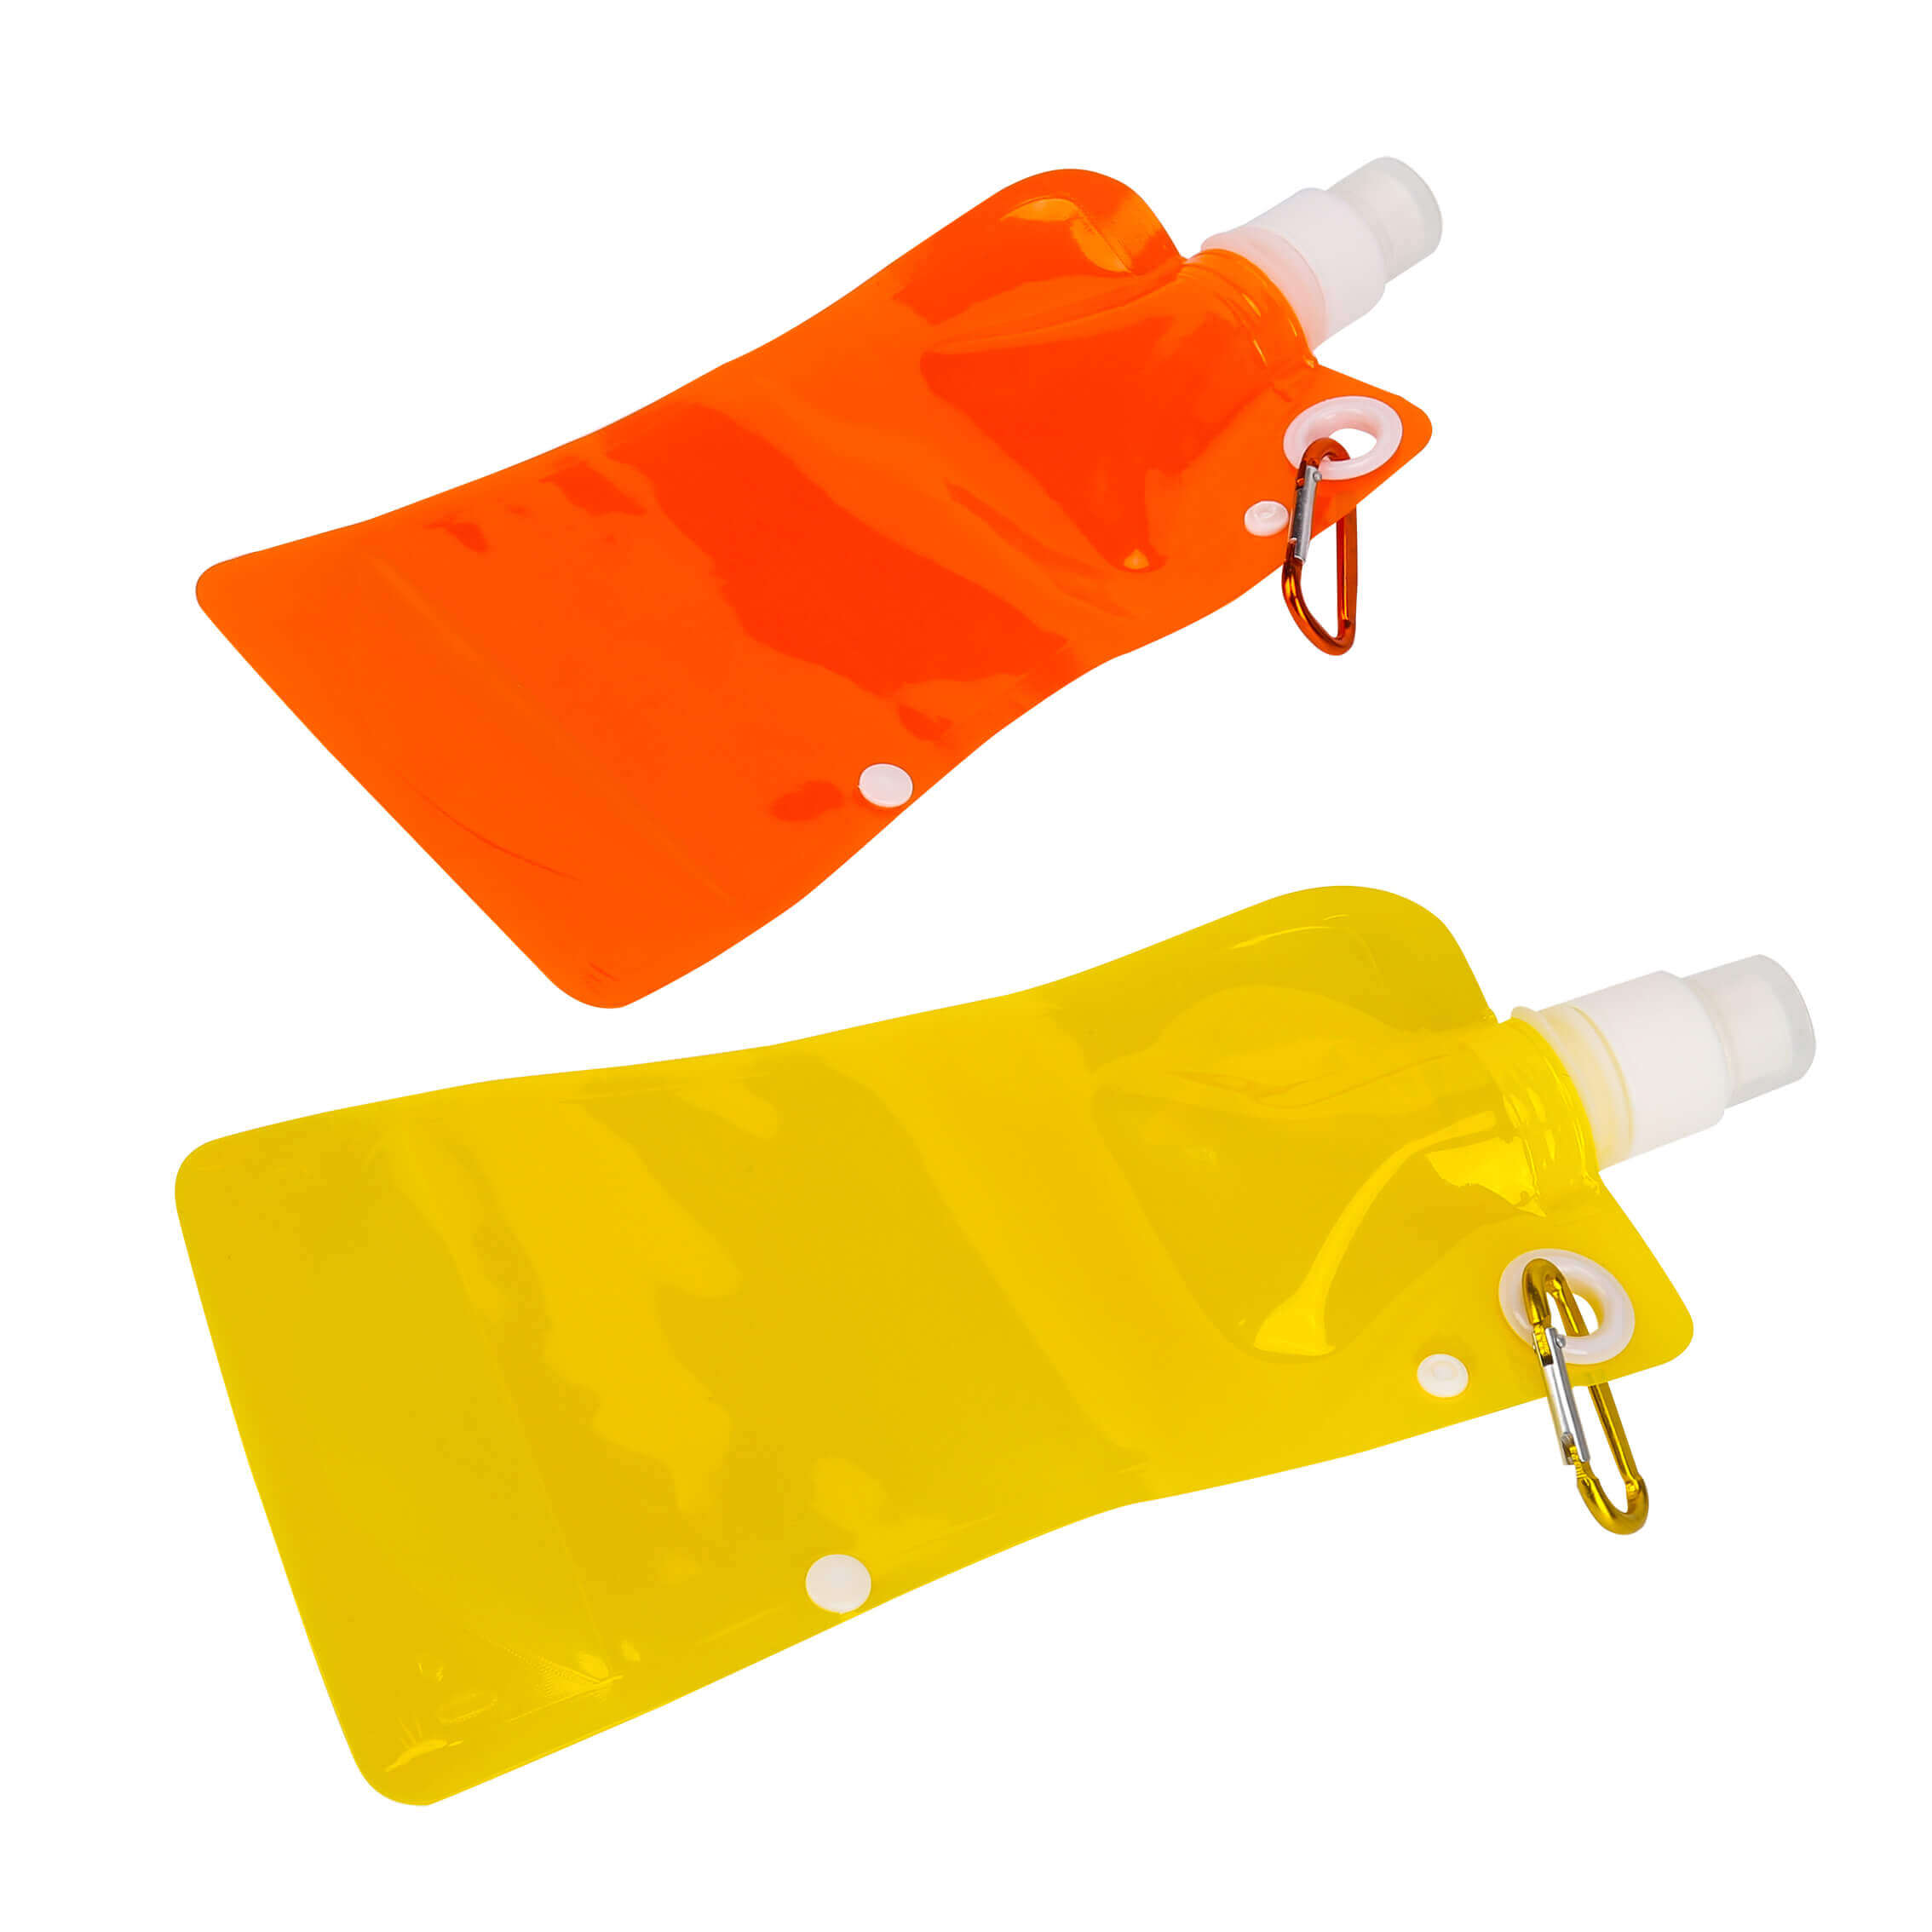 15 1 - Collapsible Custom Water Bottle